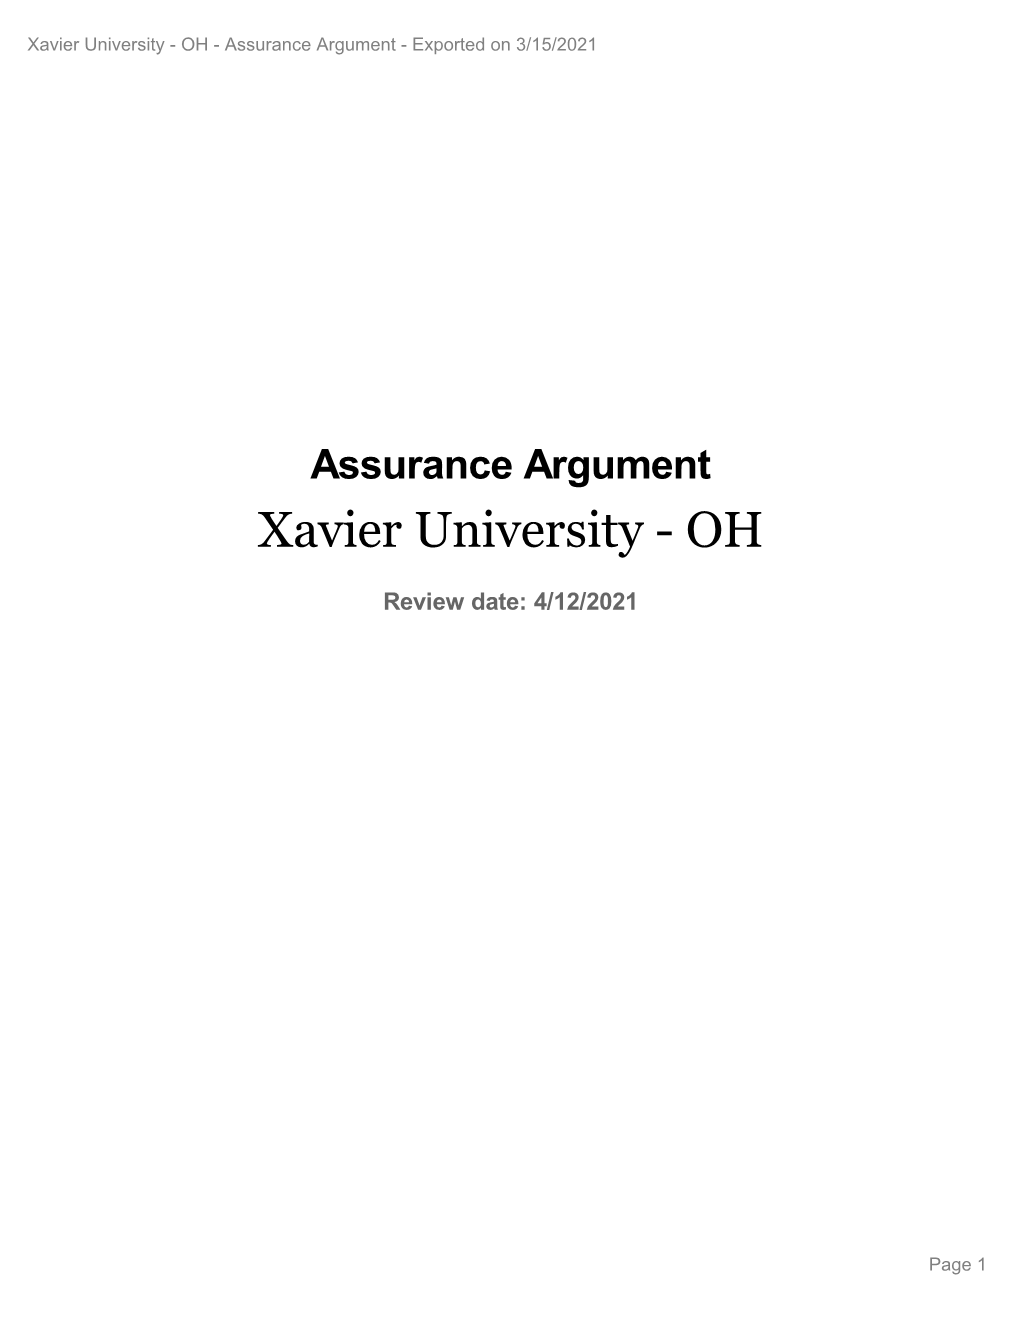 Assurance Argument - Exported on 3/15/2021